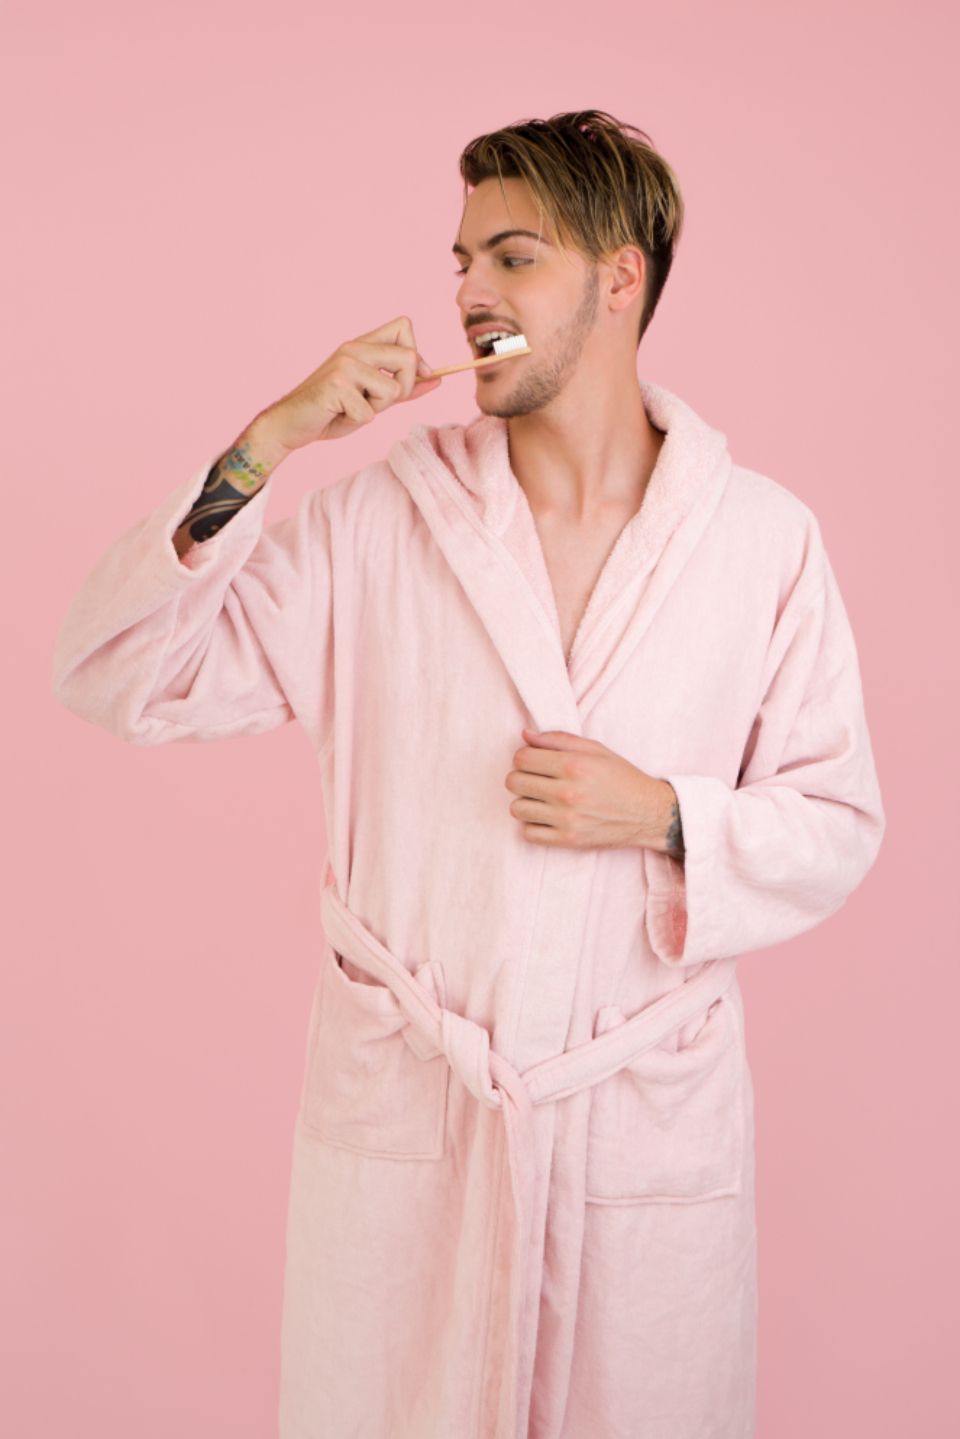 Man stands in a pink bathroom against a pink background and brushes his teeth